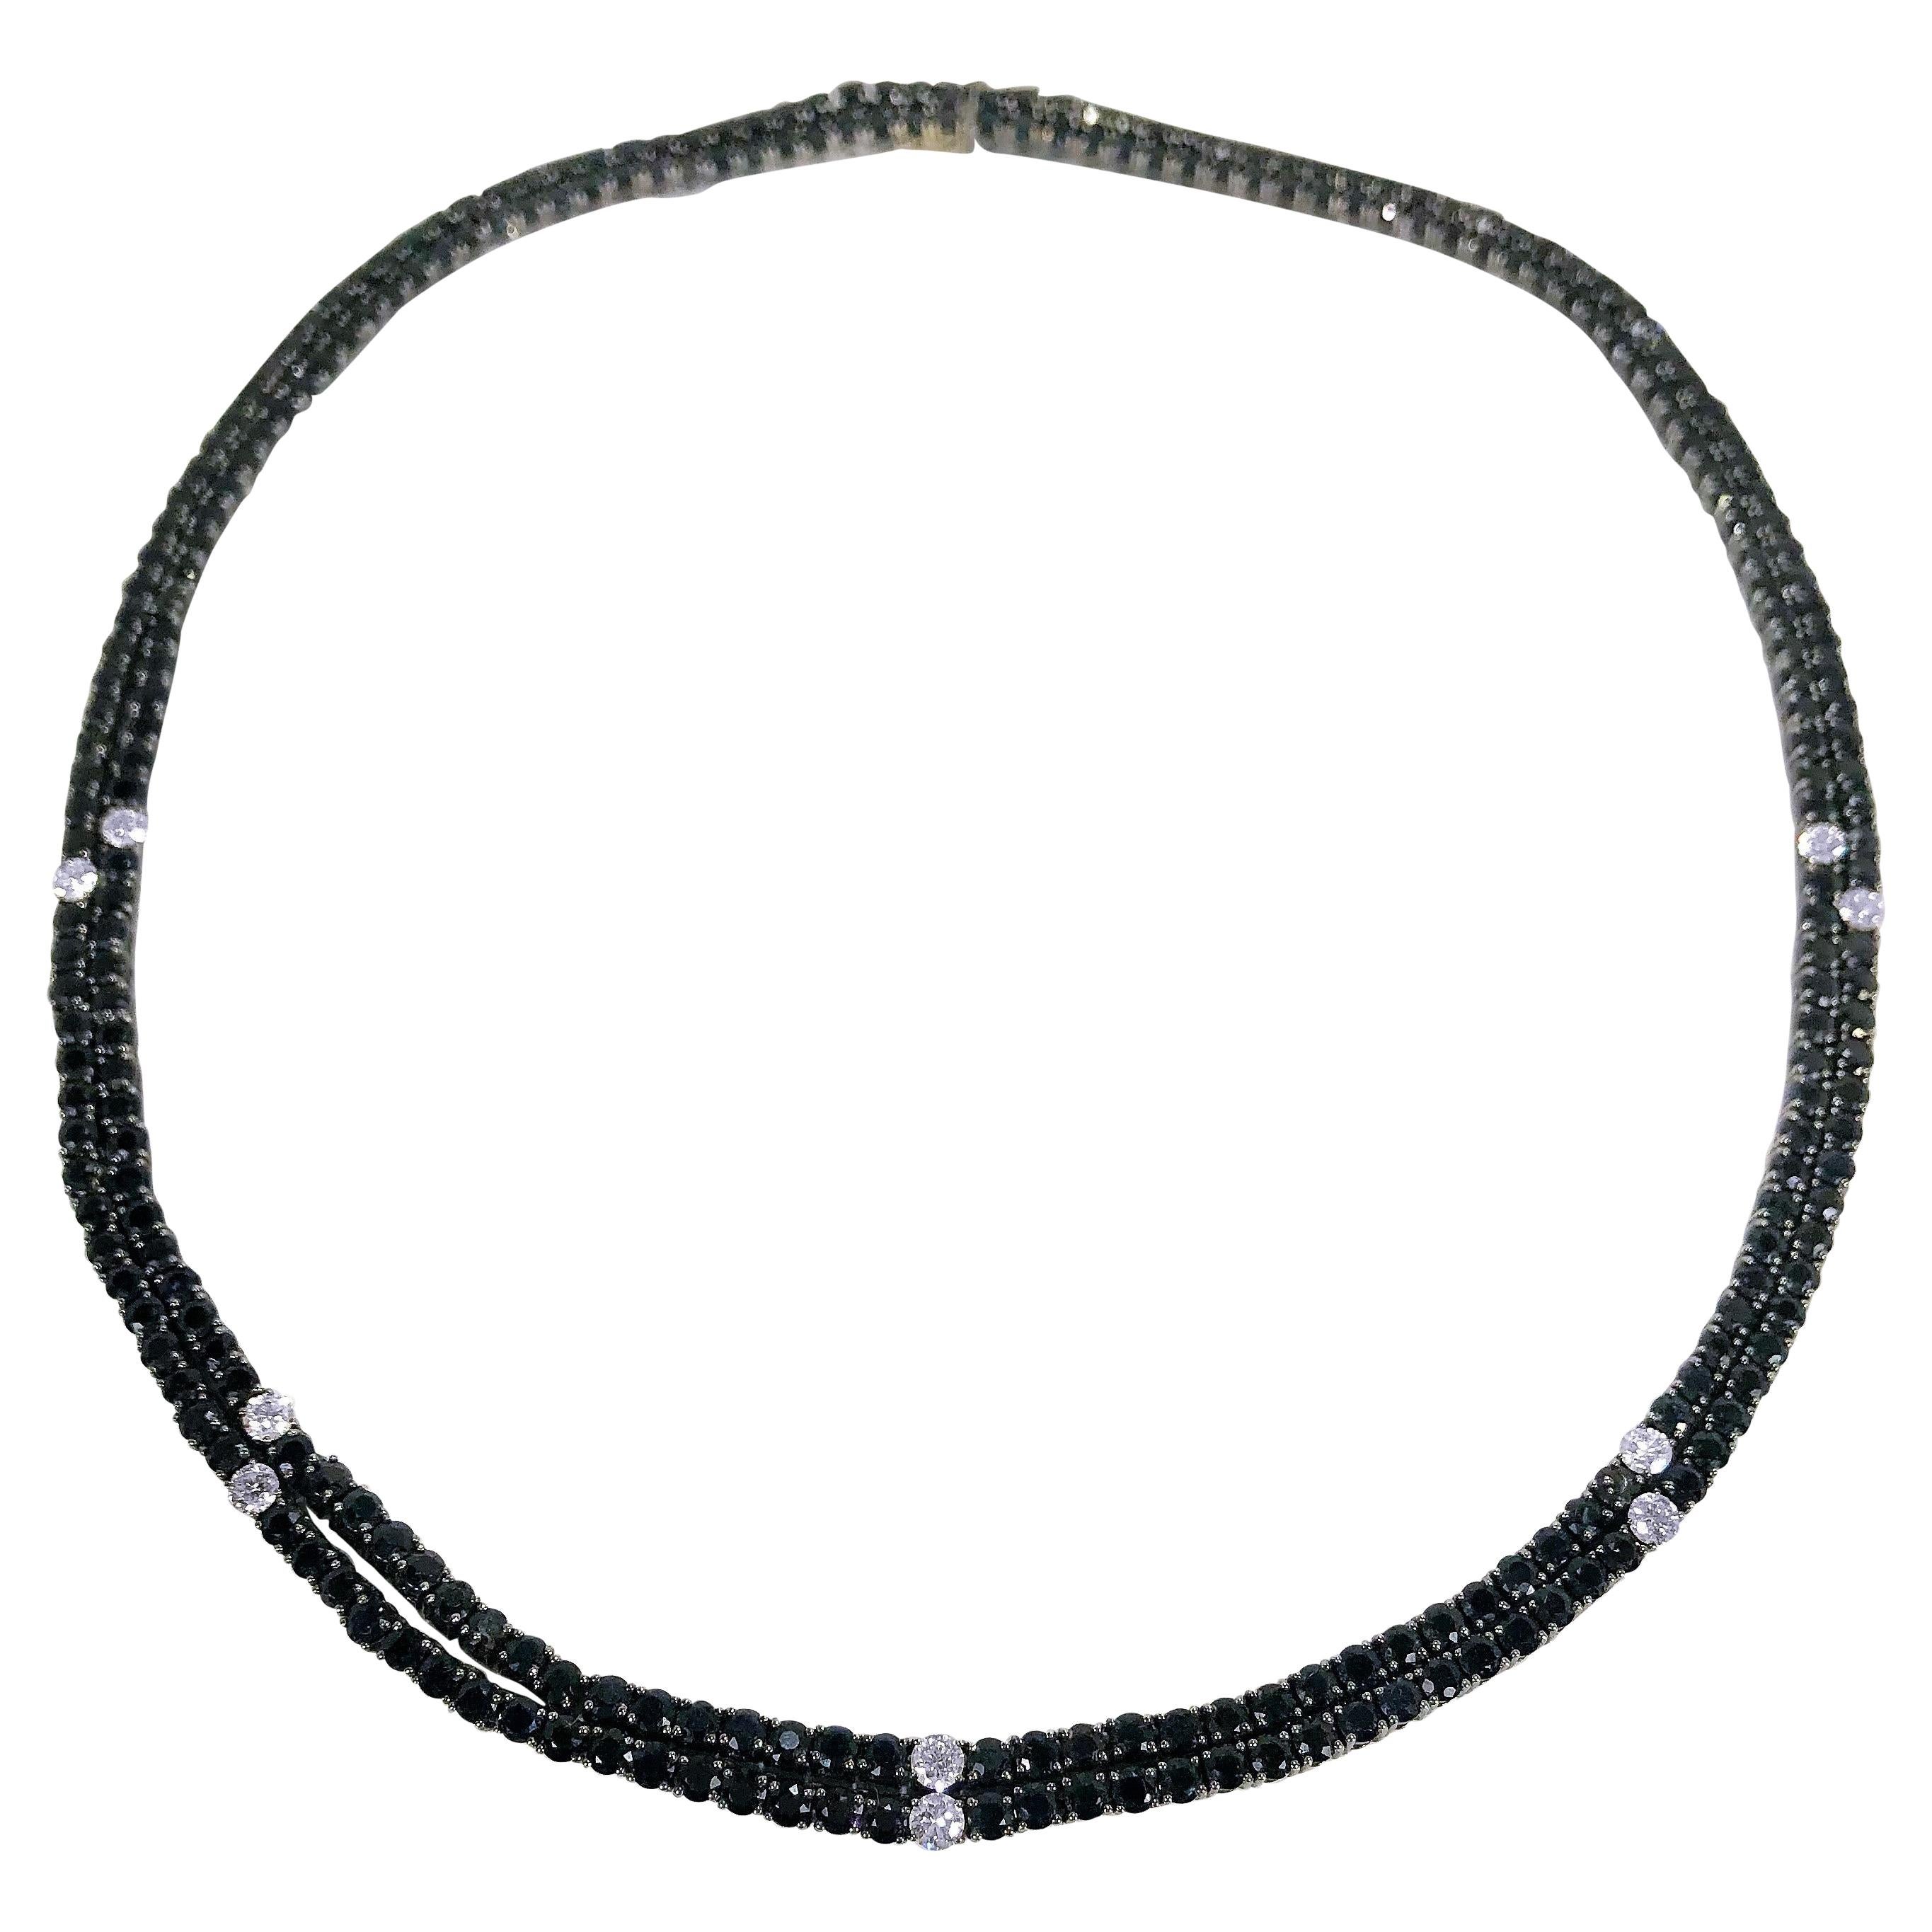 Extremely Dark Blue Sapphire and Diamond Choker Ideal for Every Day Wear